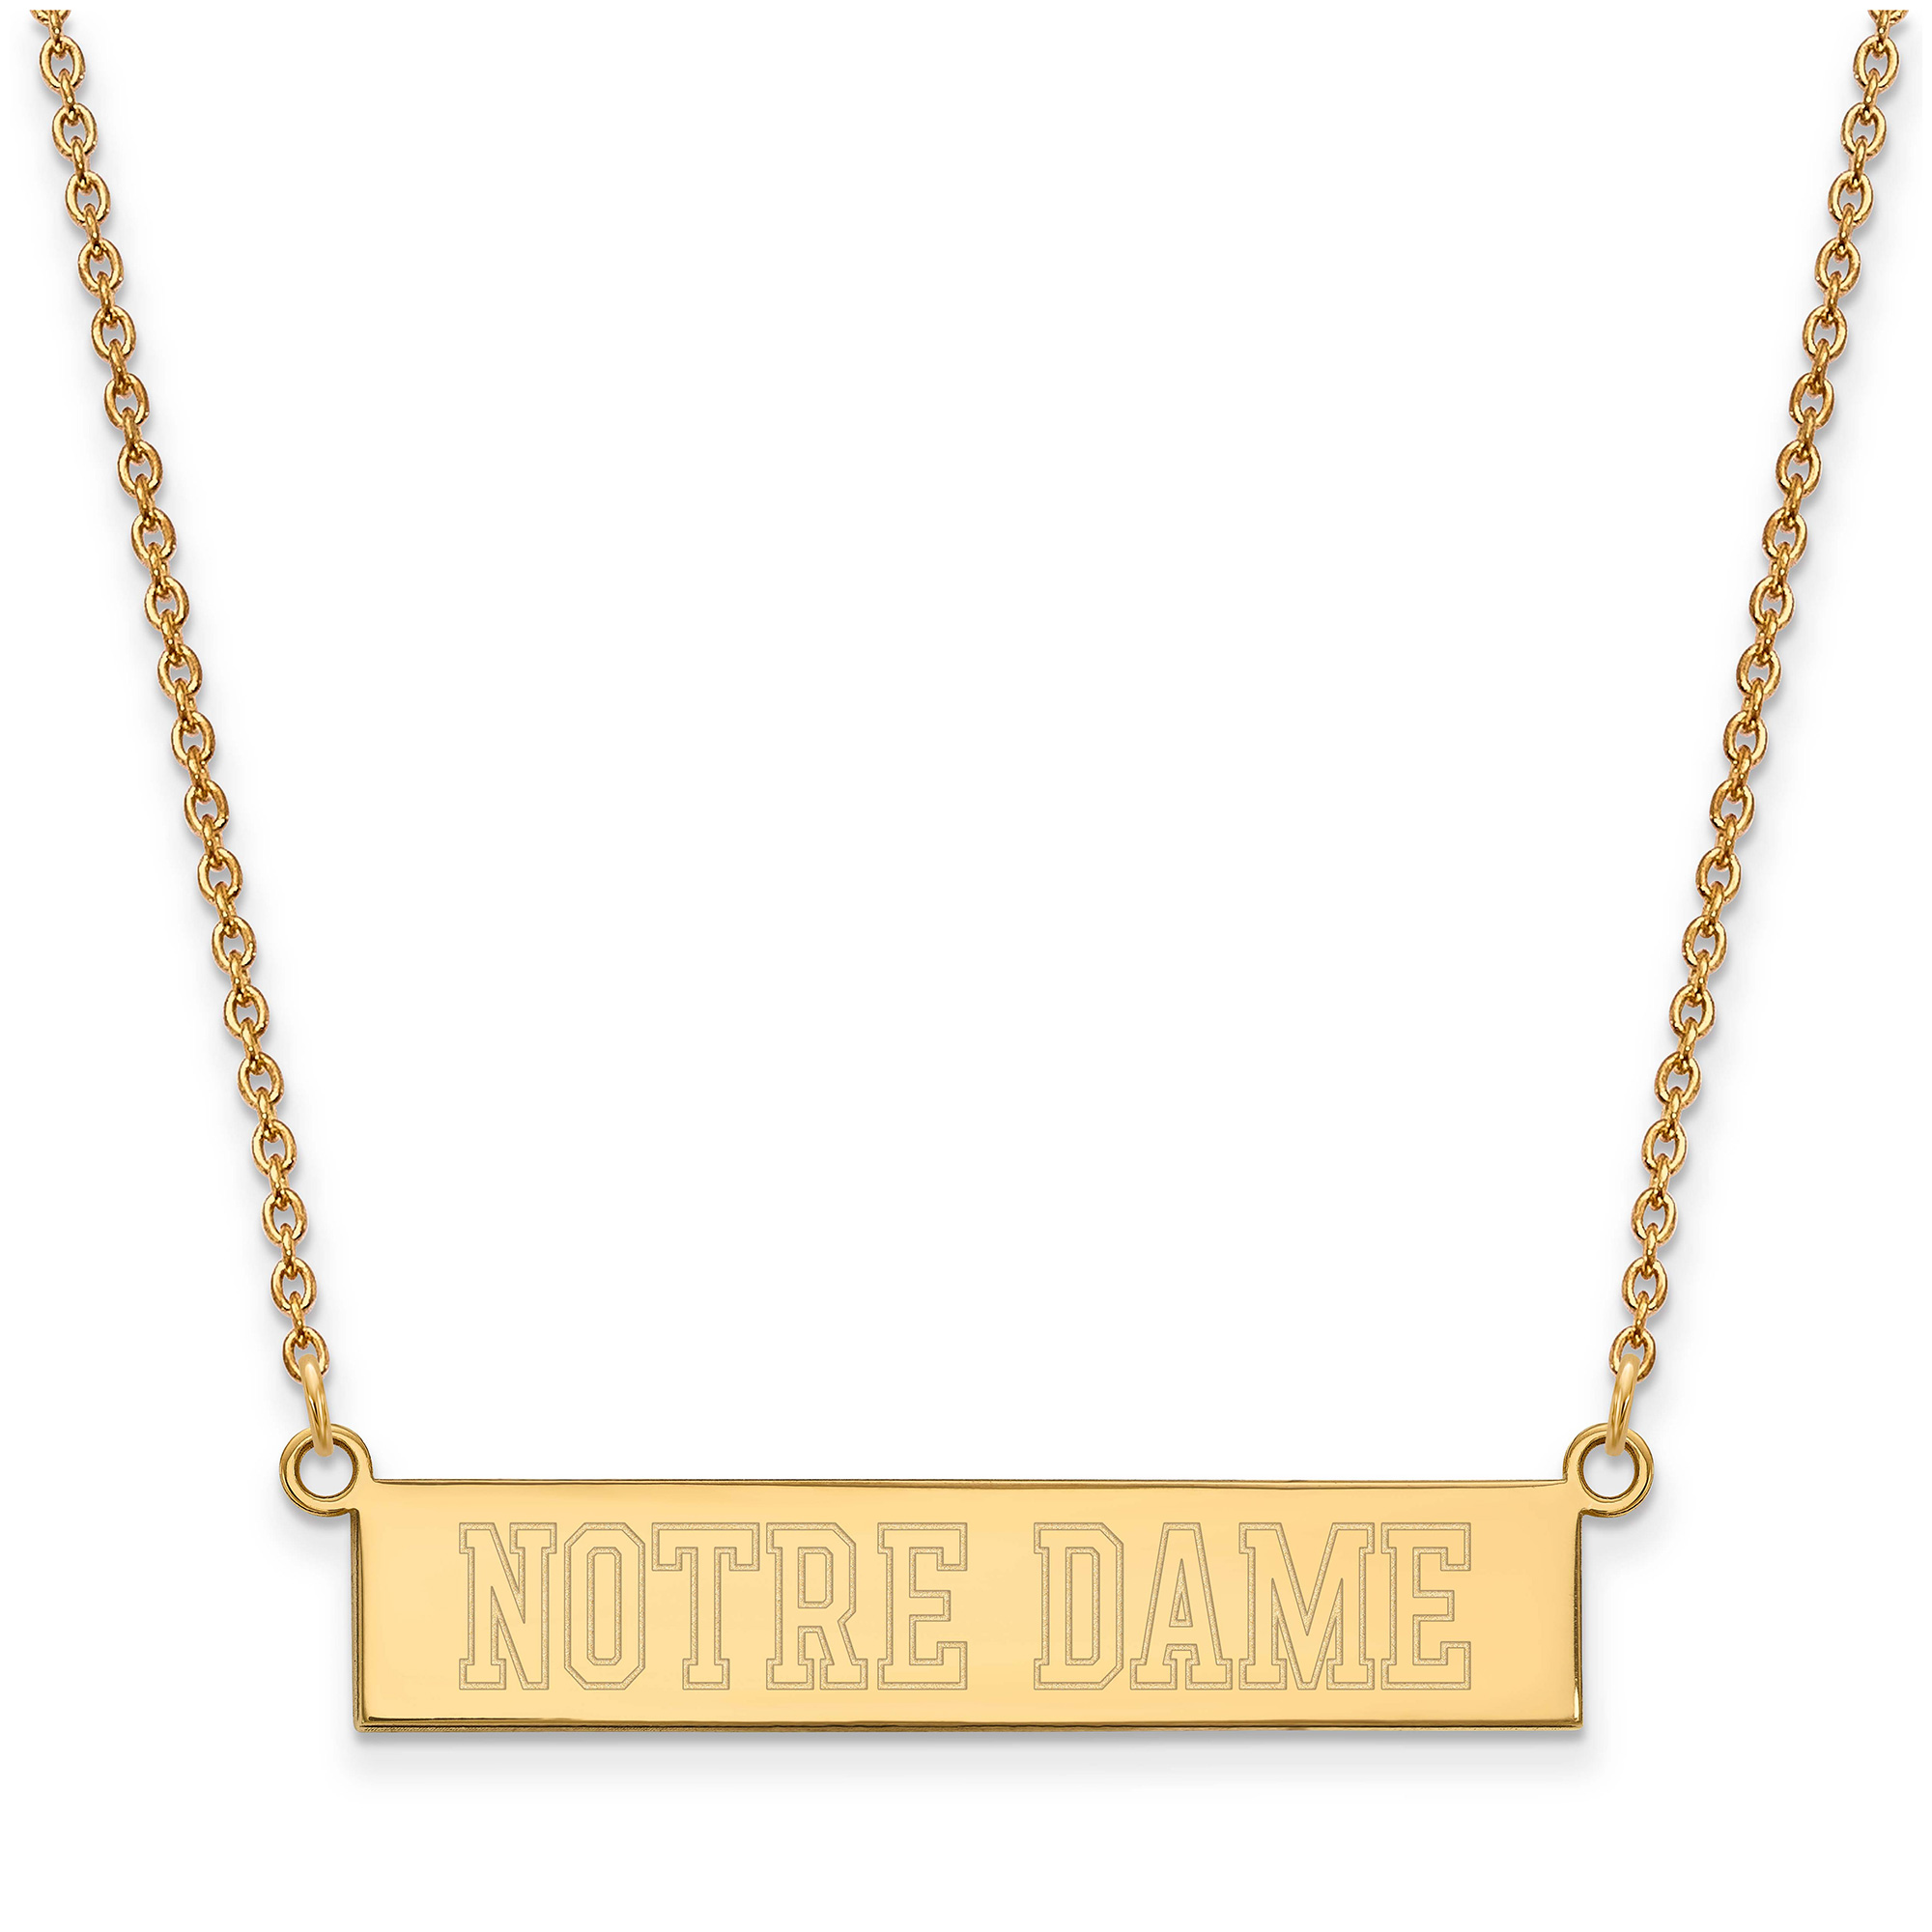 Women's Notre Dame Fighting Irish Gold Plated Small Bar Necklace - image 2 of 3